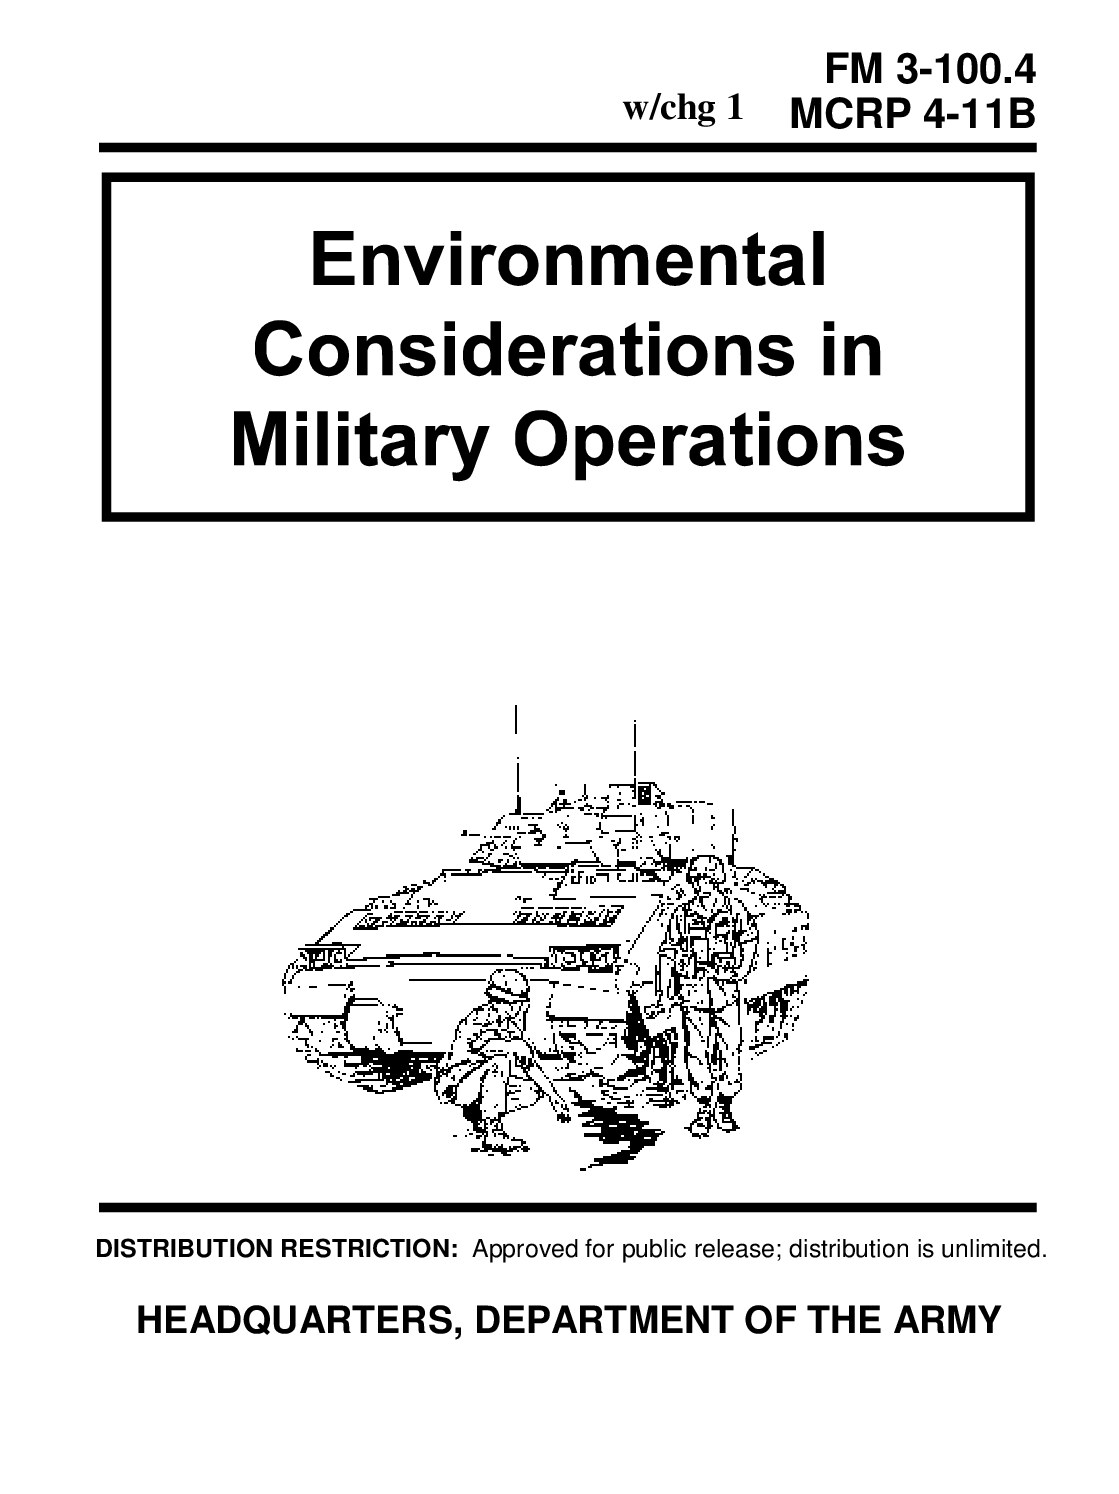 MCRP 4-11B Environmental Considerations in Military Operations